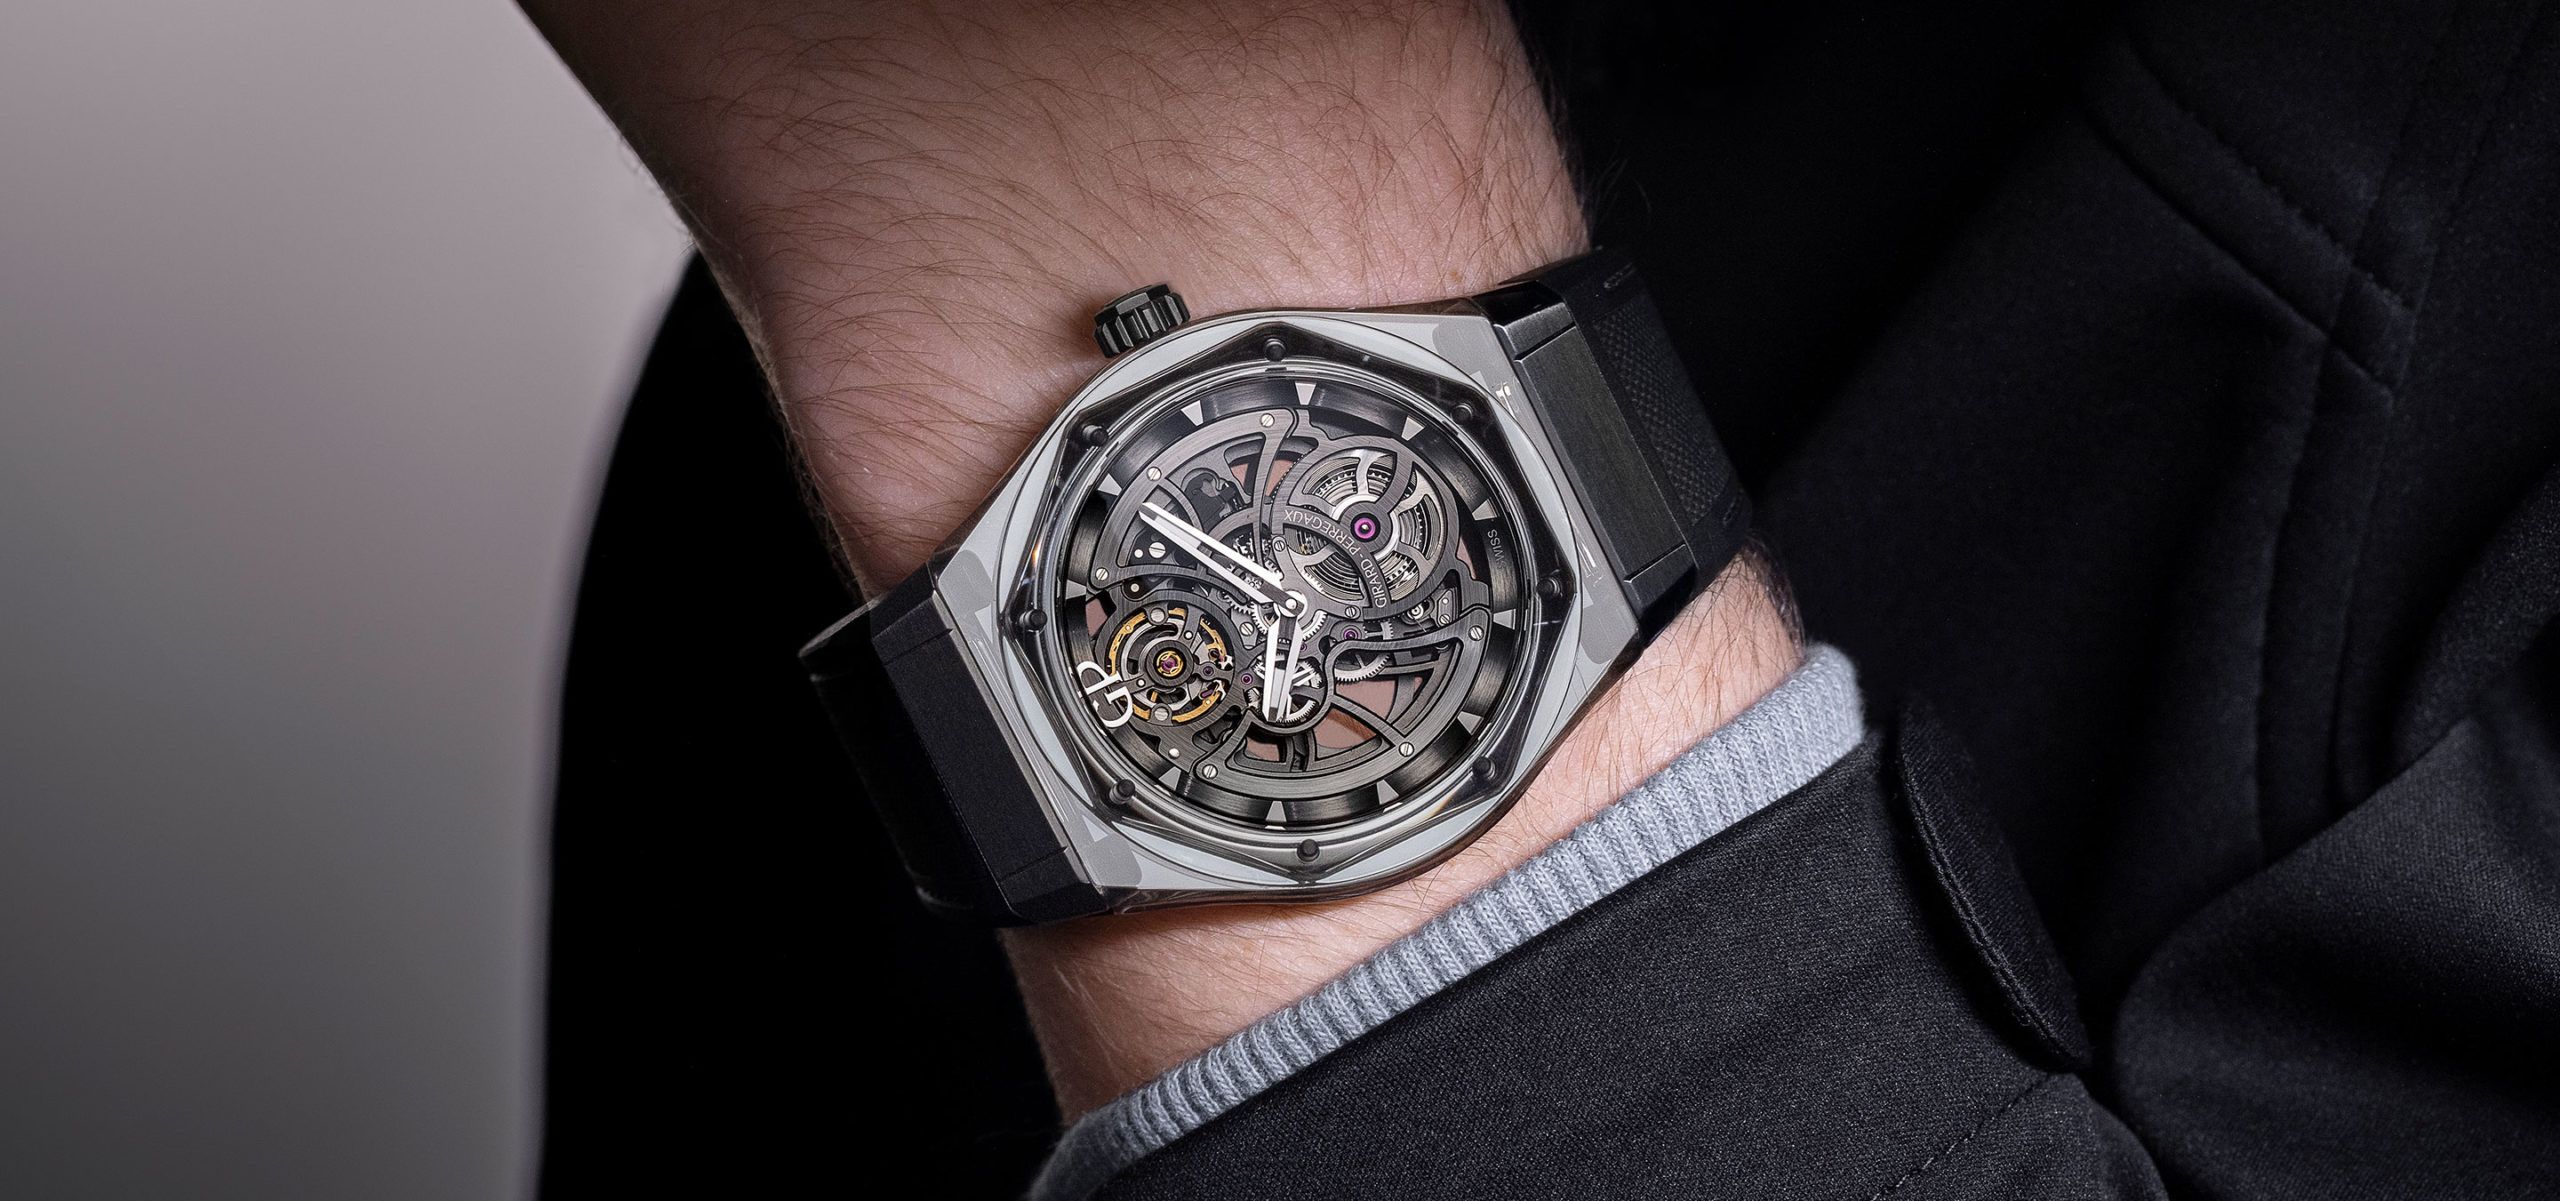 The Curious Case Of The Light And Shade: Girard-Perregaux’s Laureato Absolute In Metallised Sapphire Crystal